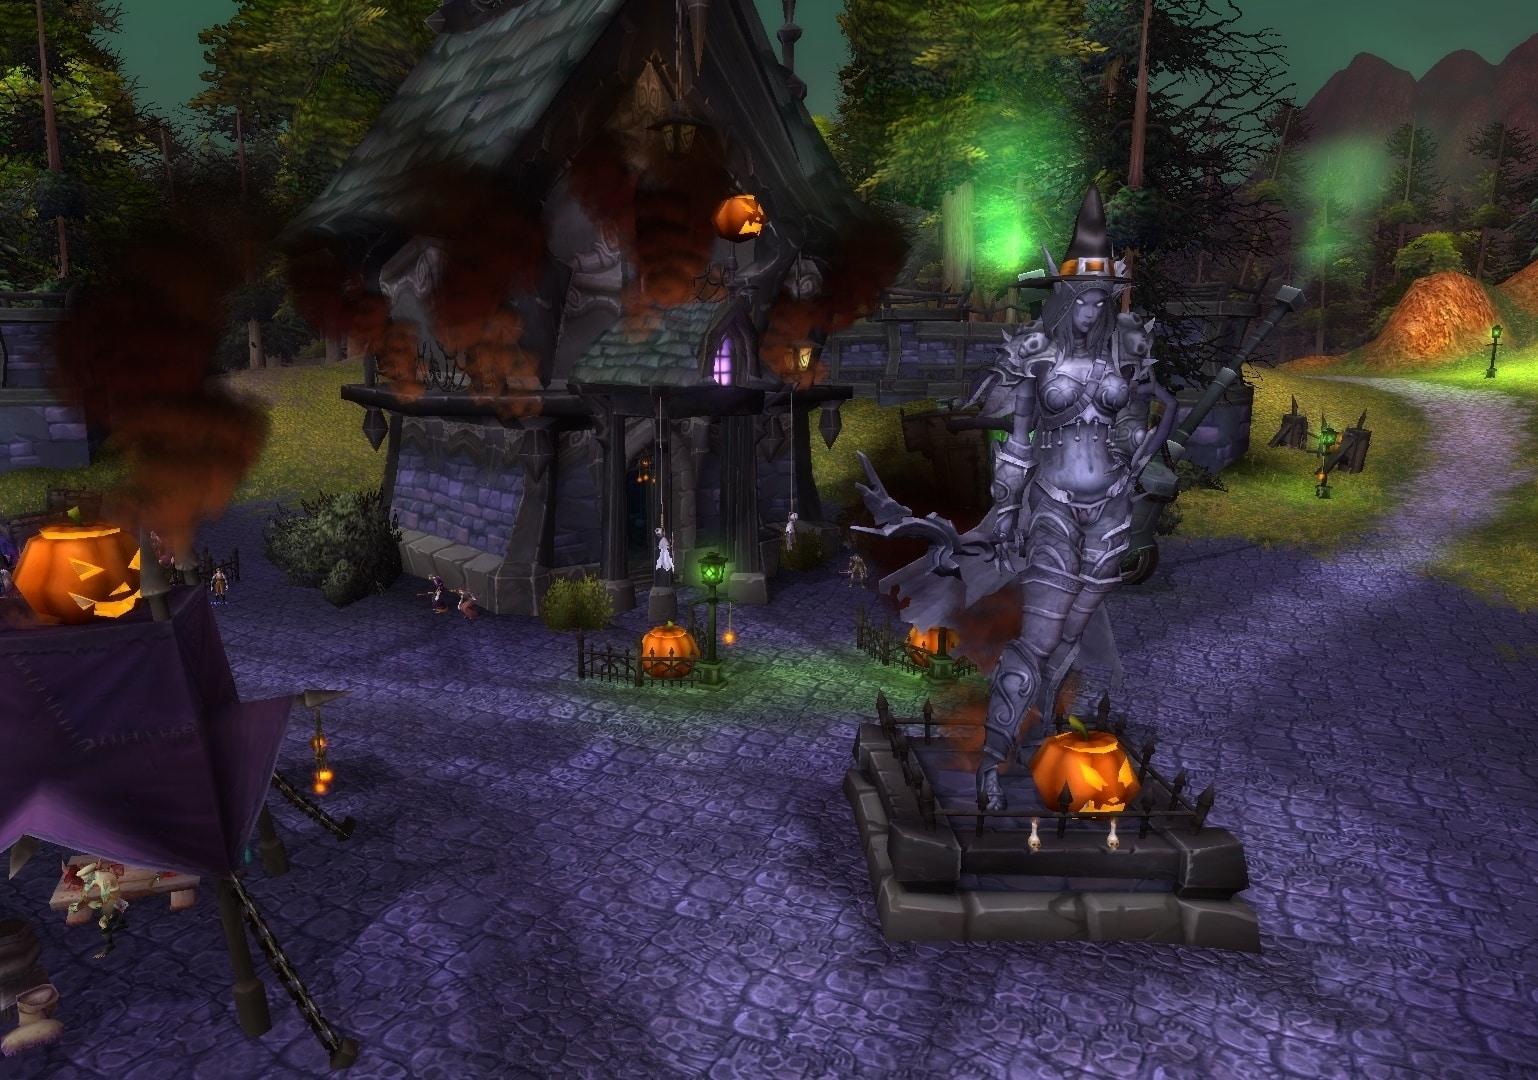 WoW players flame Blizzard over pumpkin change in Halloween event